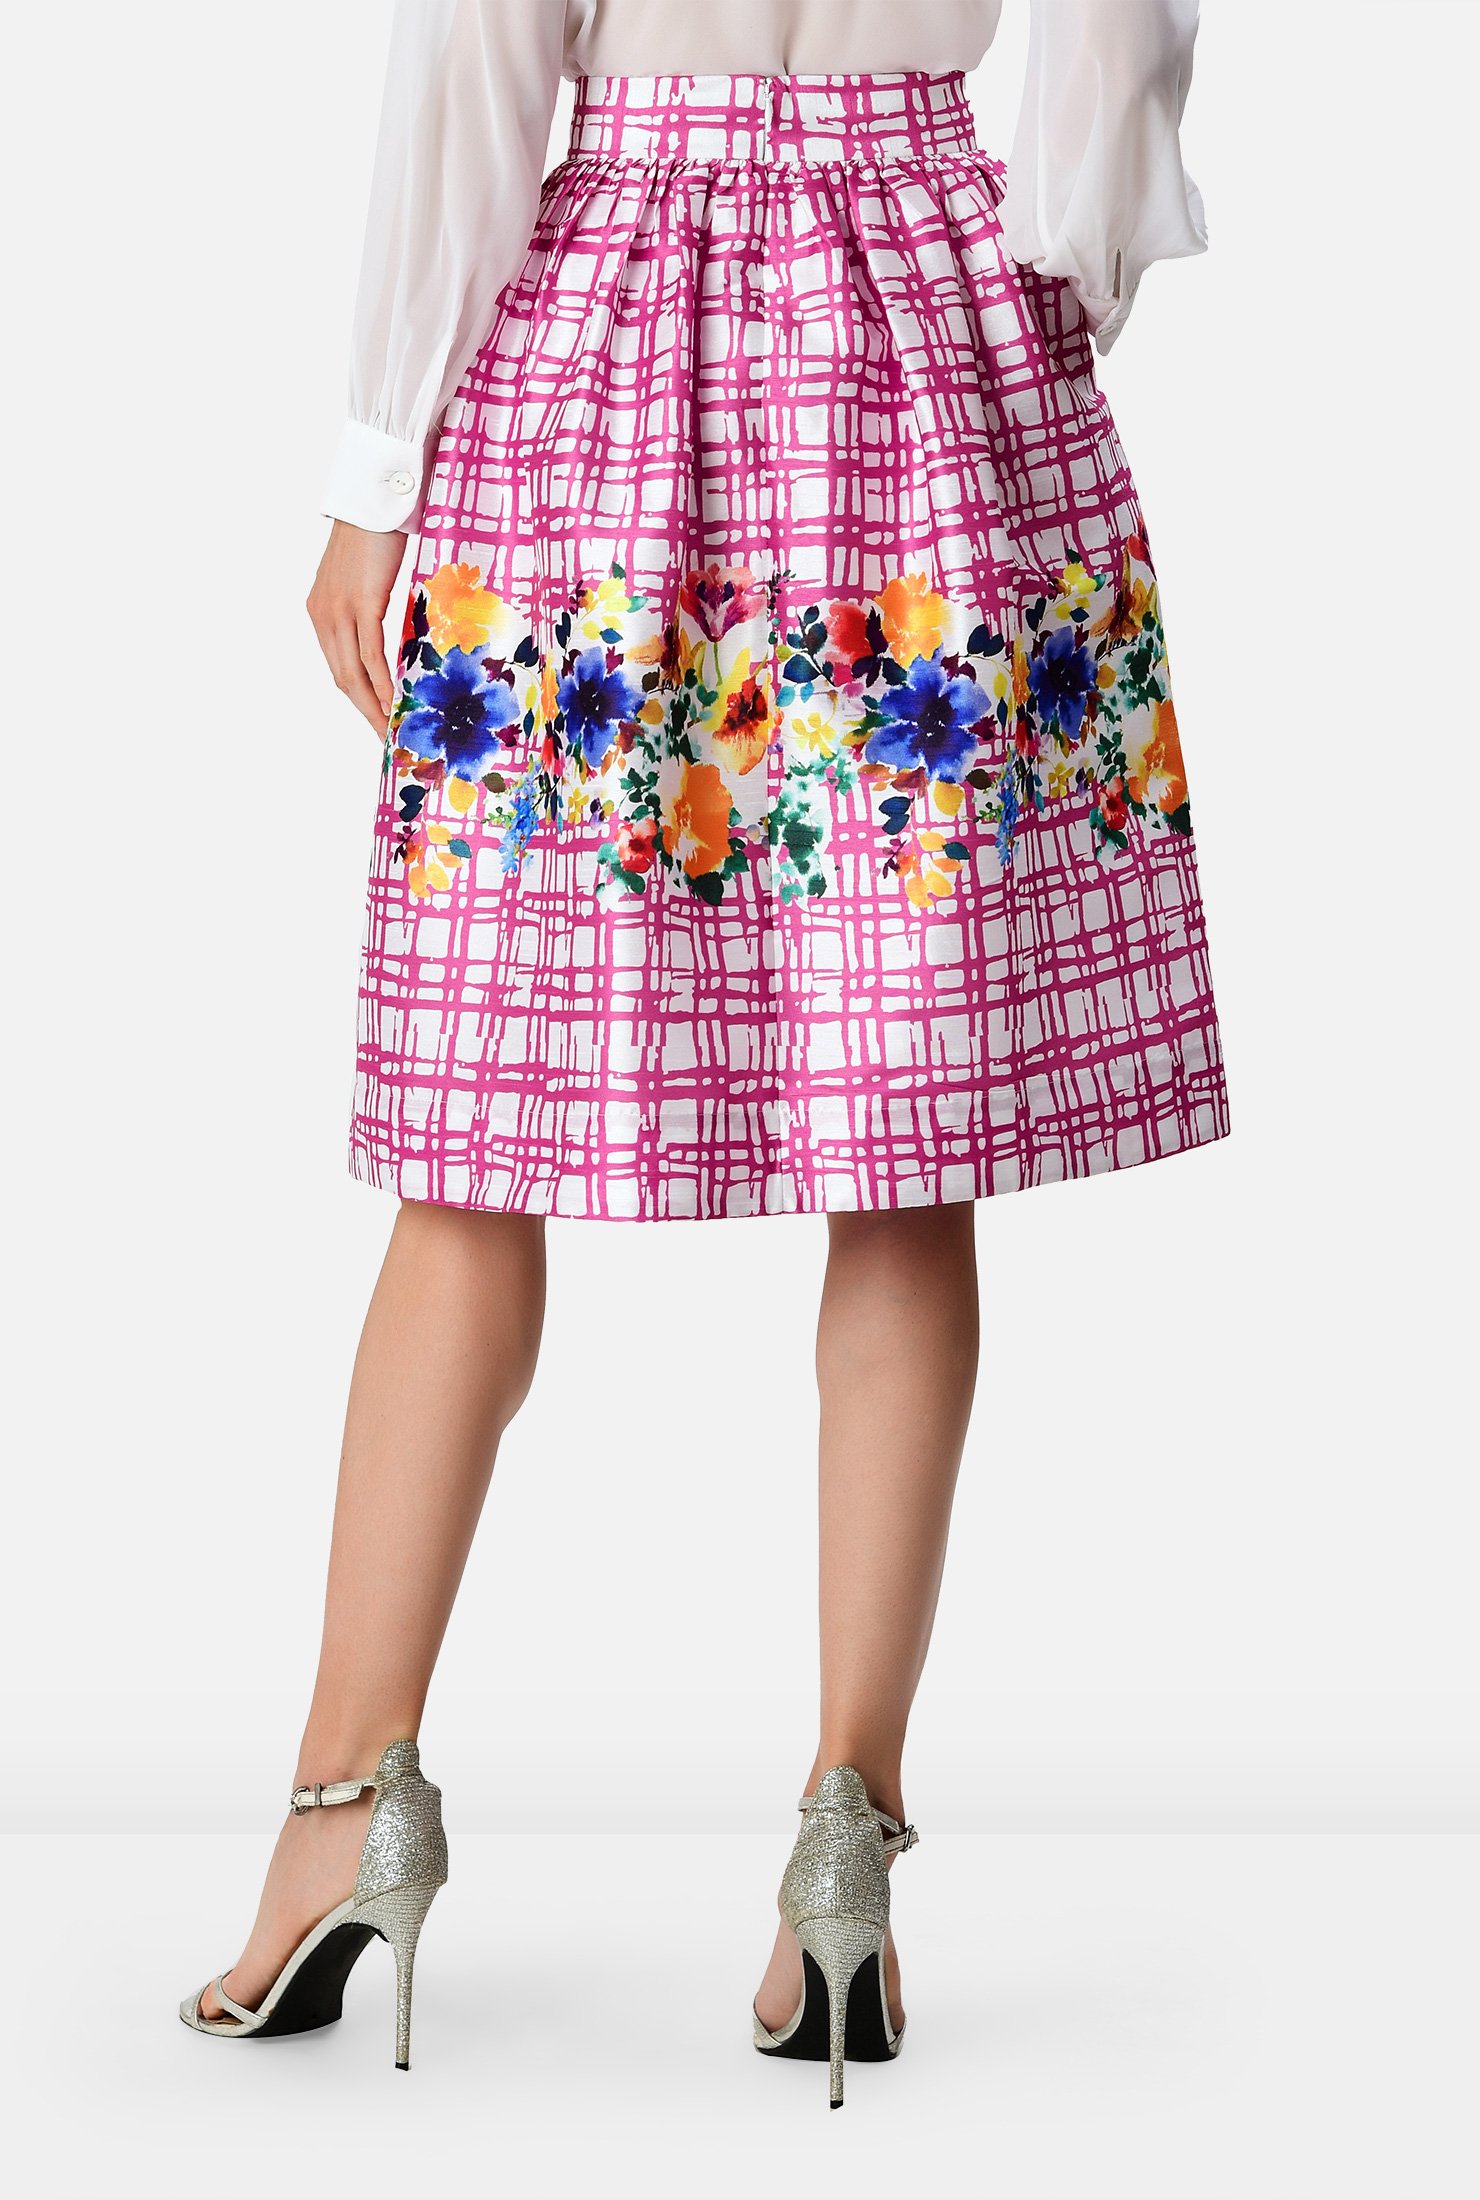 Watercolor florals pop up in vibrant hues on our check print poly-dupioni skirt styled with a banded waist and ruched pleating for a full flare.